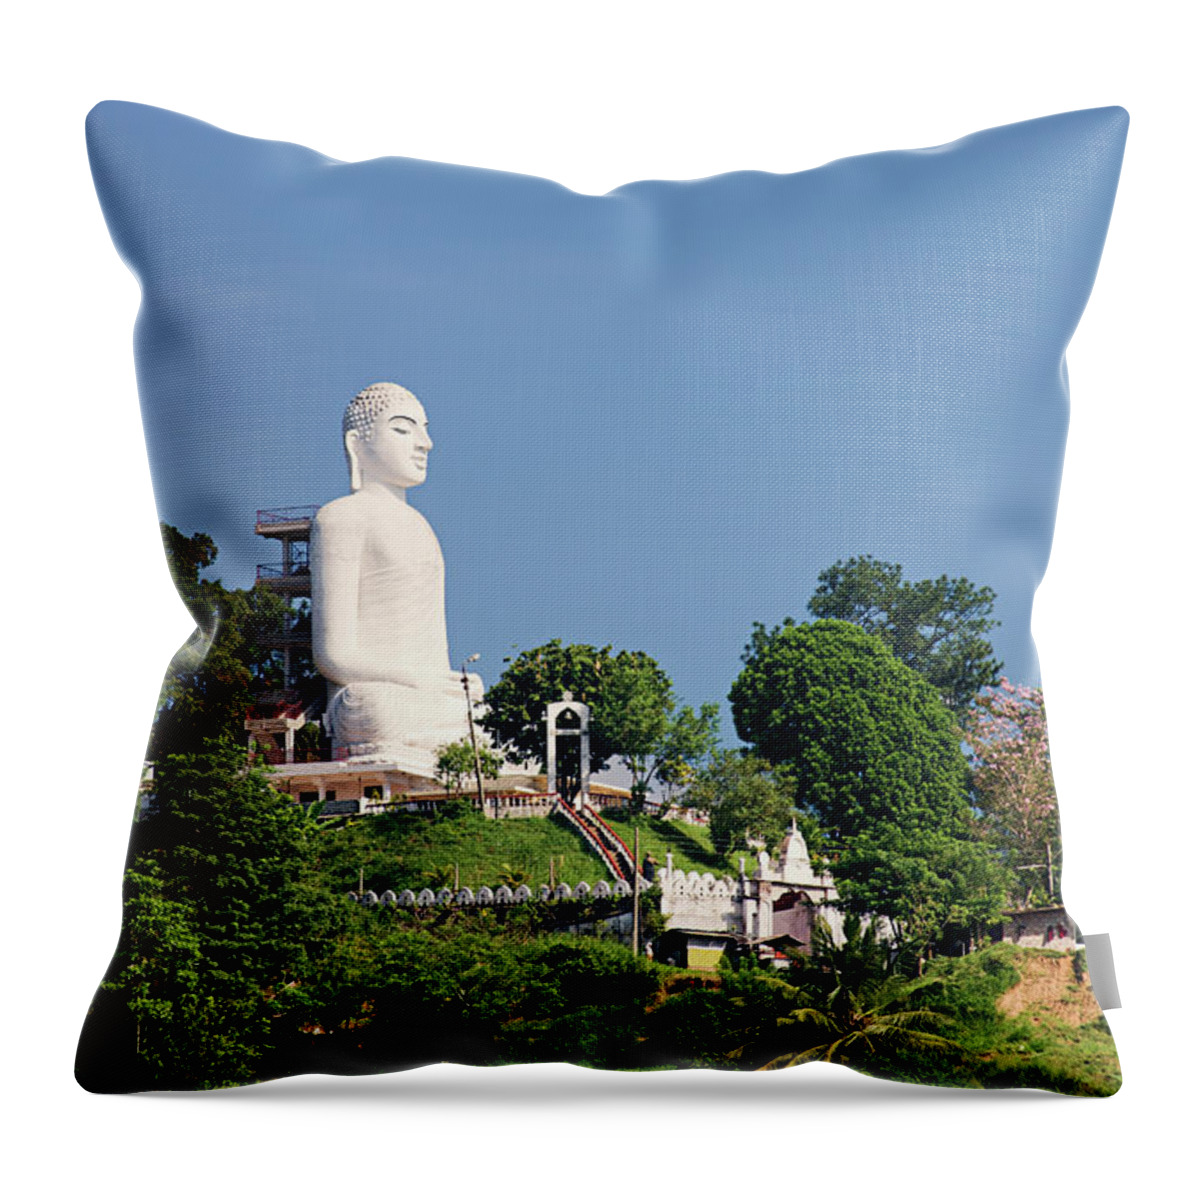 Indian Subcontinent Ethnicity Throw Pillow featuring the photograph Buddha Statue, Sri Lanka, Kandy by Hadynyah